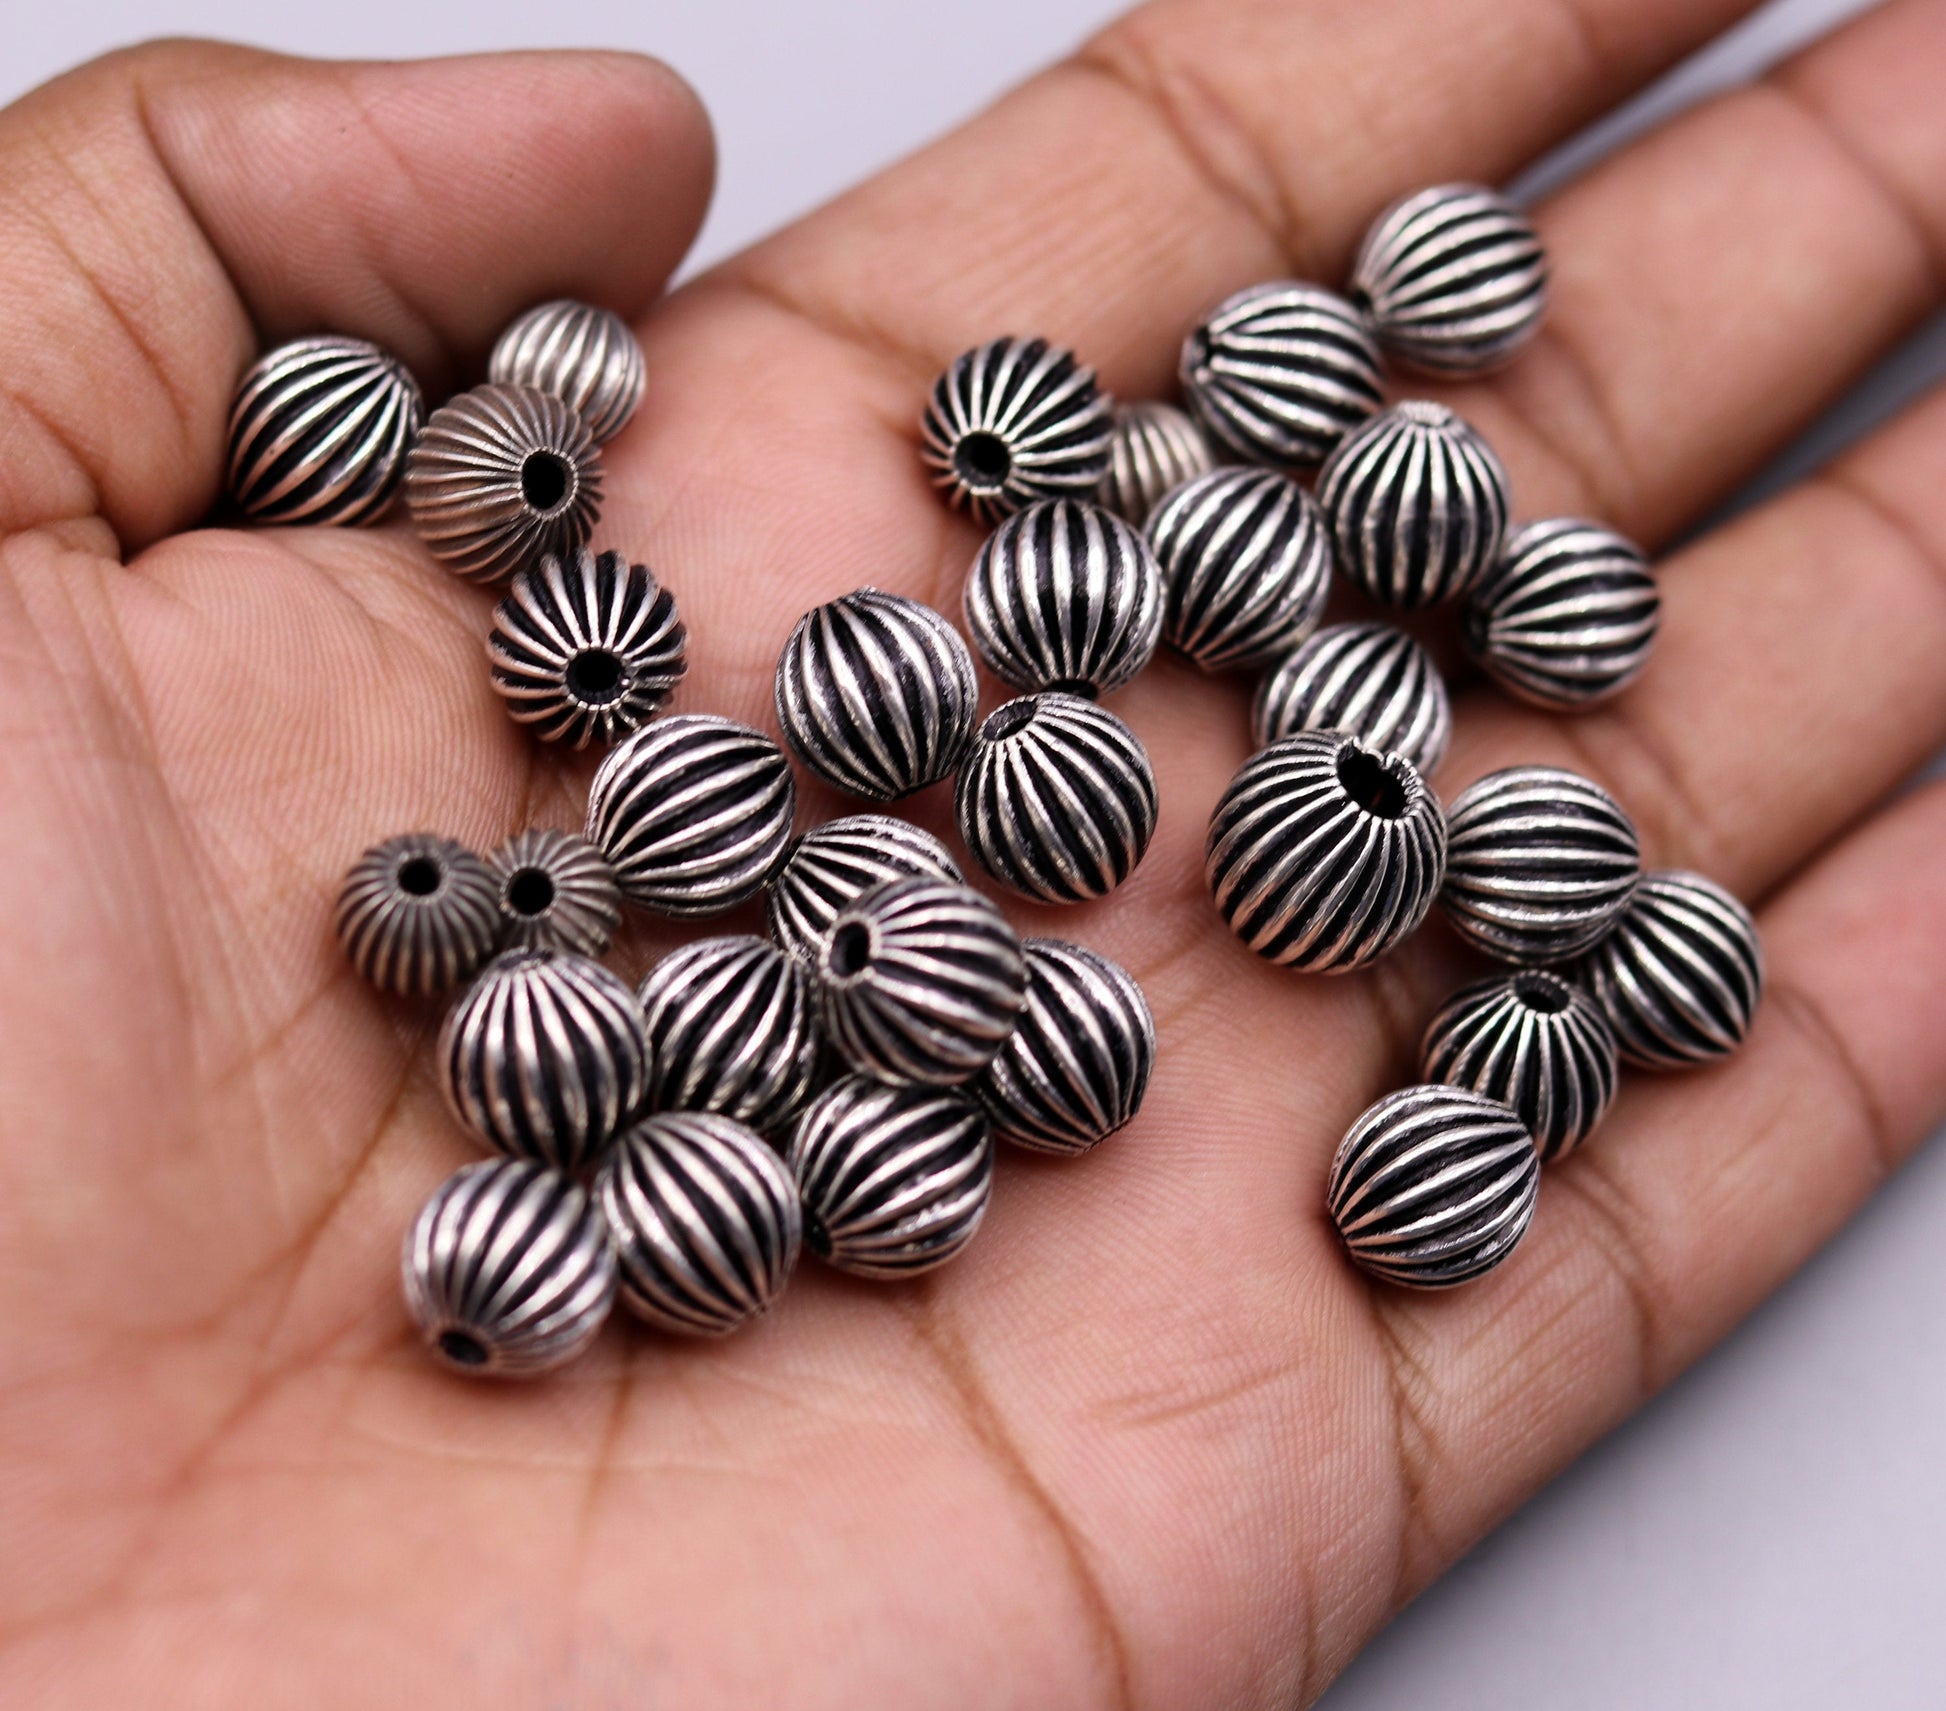 Lot 10 pieces Vintage antique design handmade 925 sterling silver beads loose beads for jewelry making ideas bd04 - TRIBAL ORNAMENTS